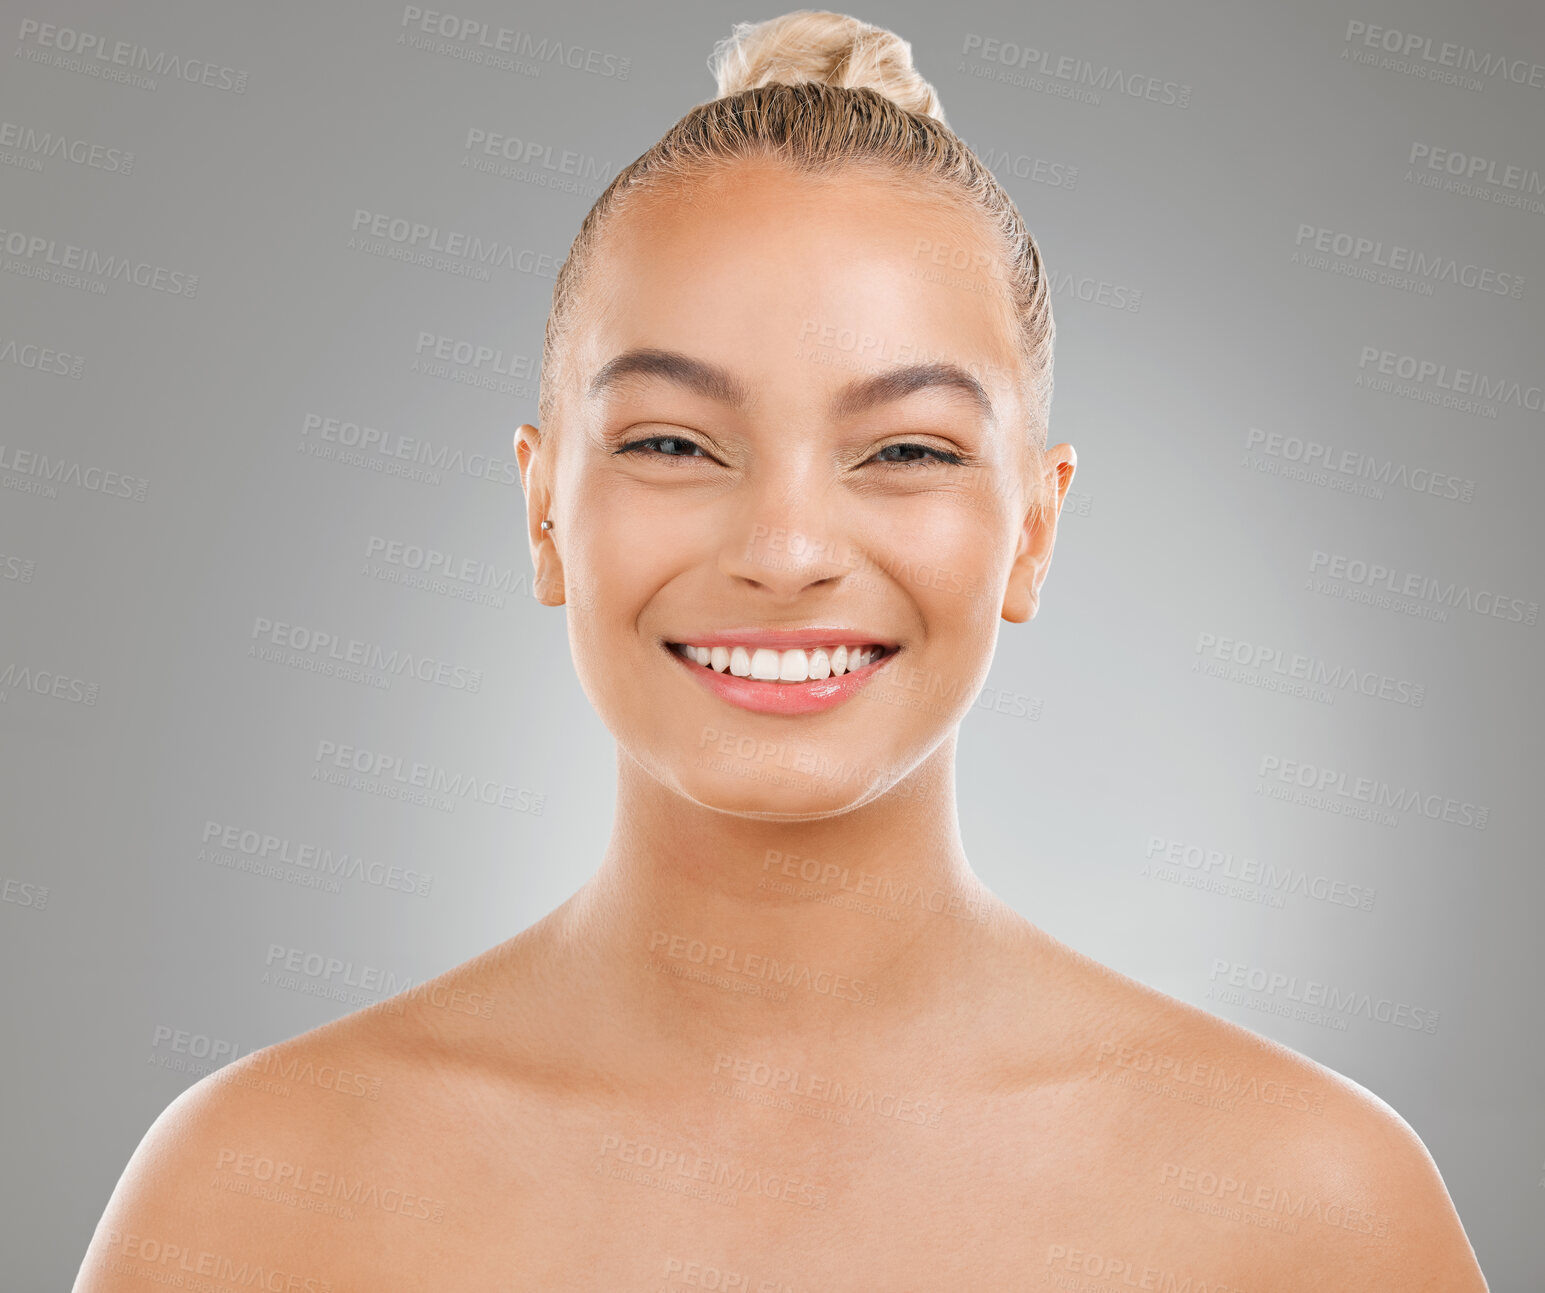 Buy stock photo Shot of an attractive young woman posing against a studio background